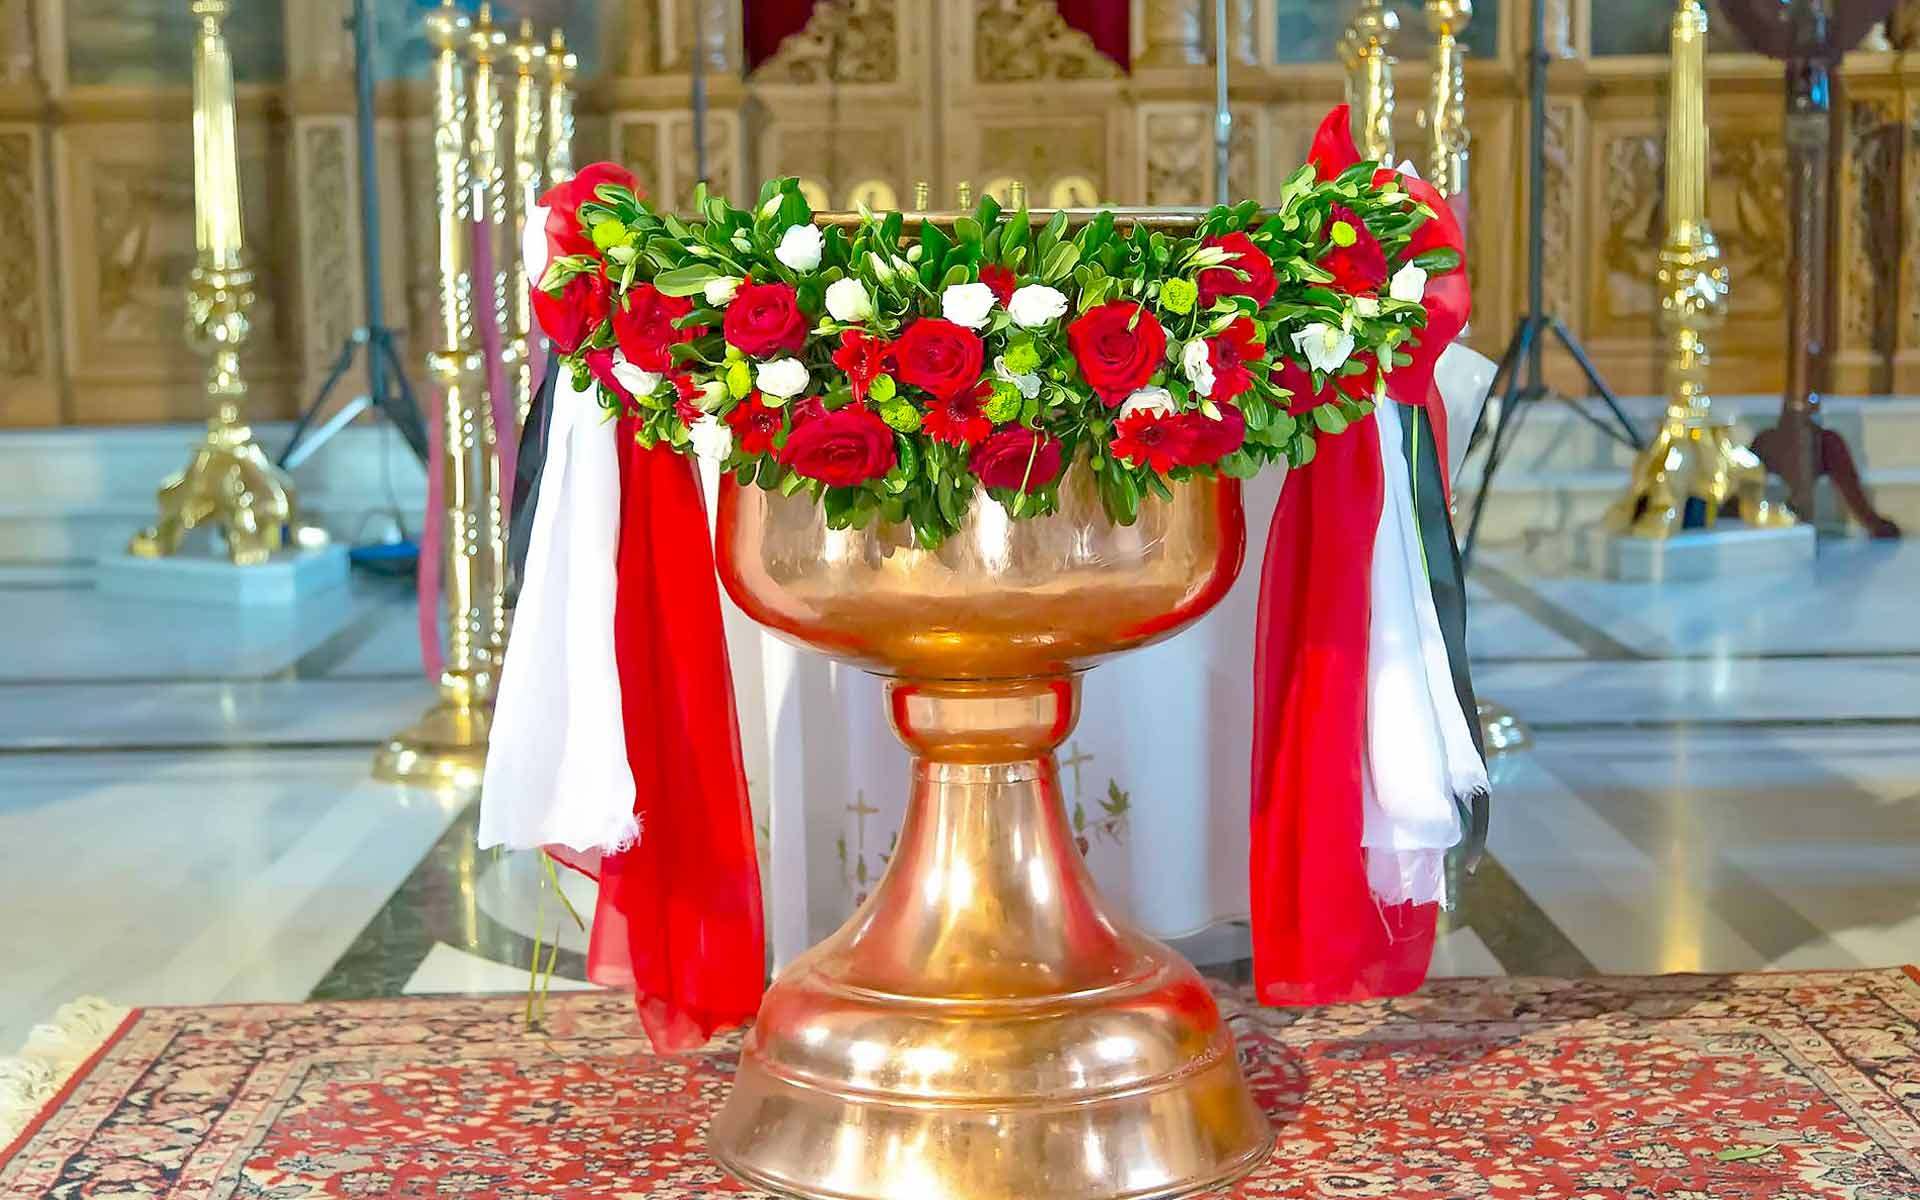 Enchanting-Golden-Gilded-Baptismal-Basin-Surrounded-By-Red-And-White-Roses-Draped-In-Chiffon